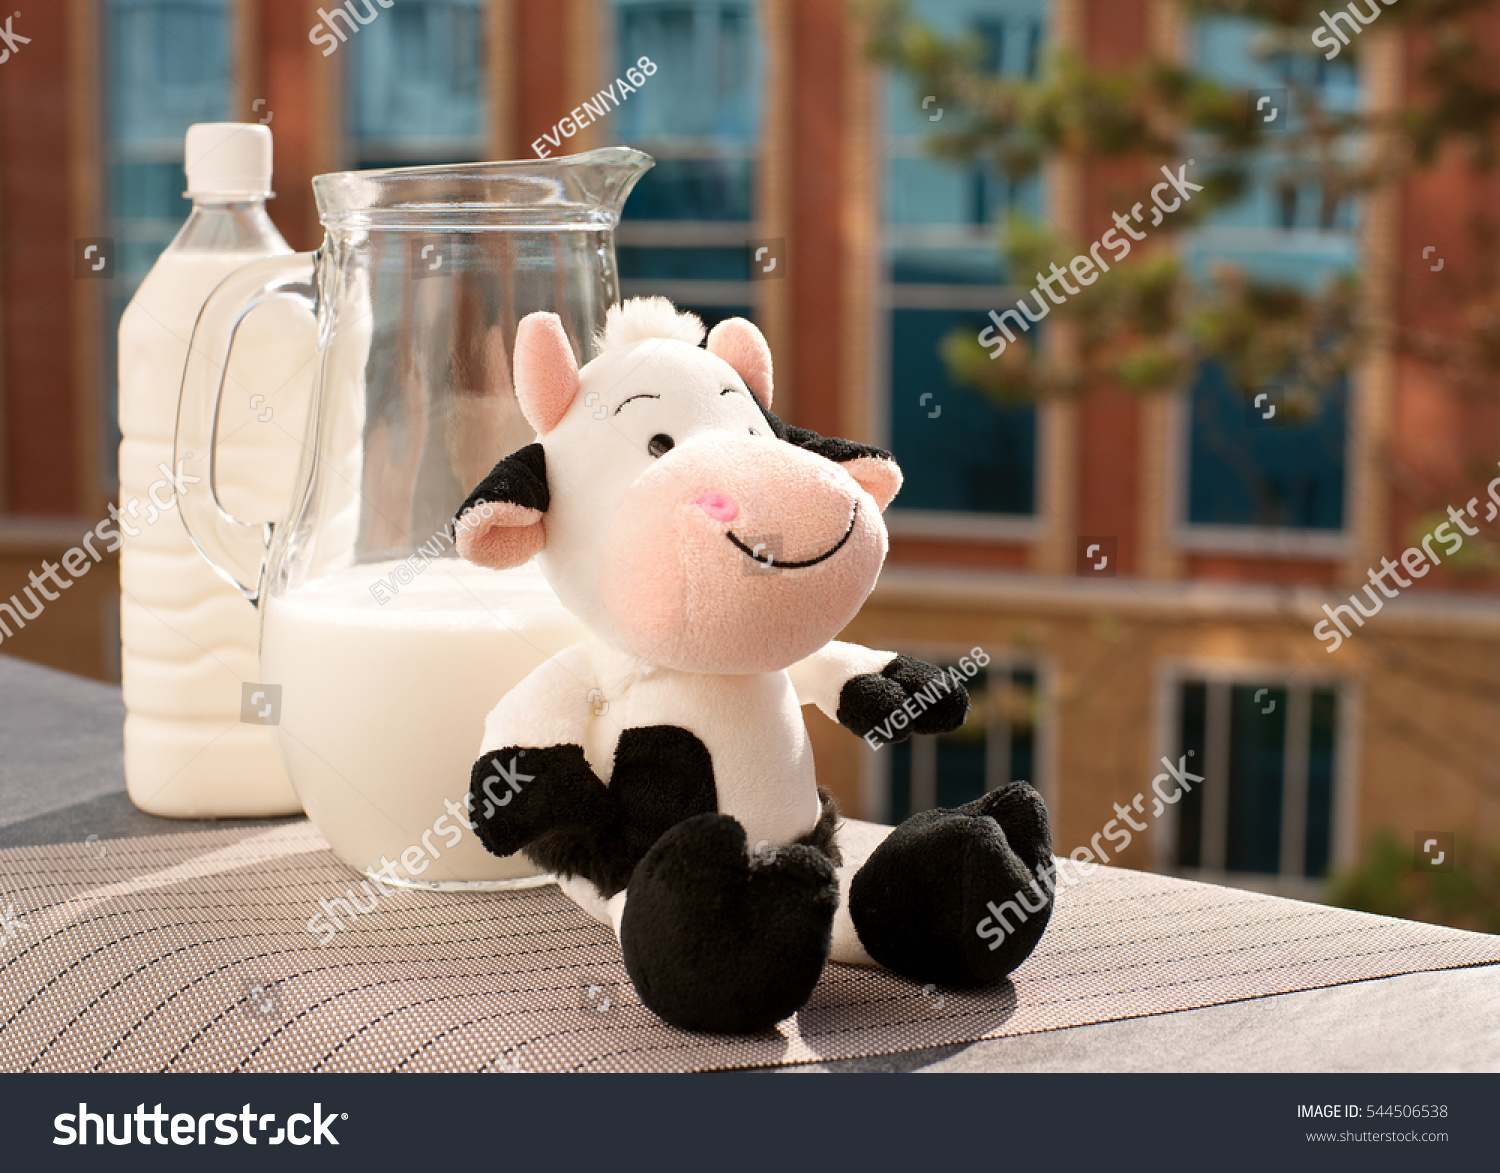 Milk and toy cow. Funny spotted cow against a background of milk. Milk in a jug and a plastic bottle on the windowsill balcony. Breakfast is good for health. #544506538